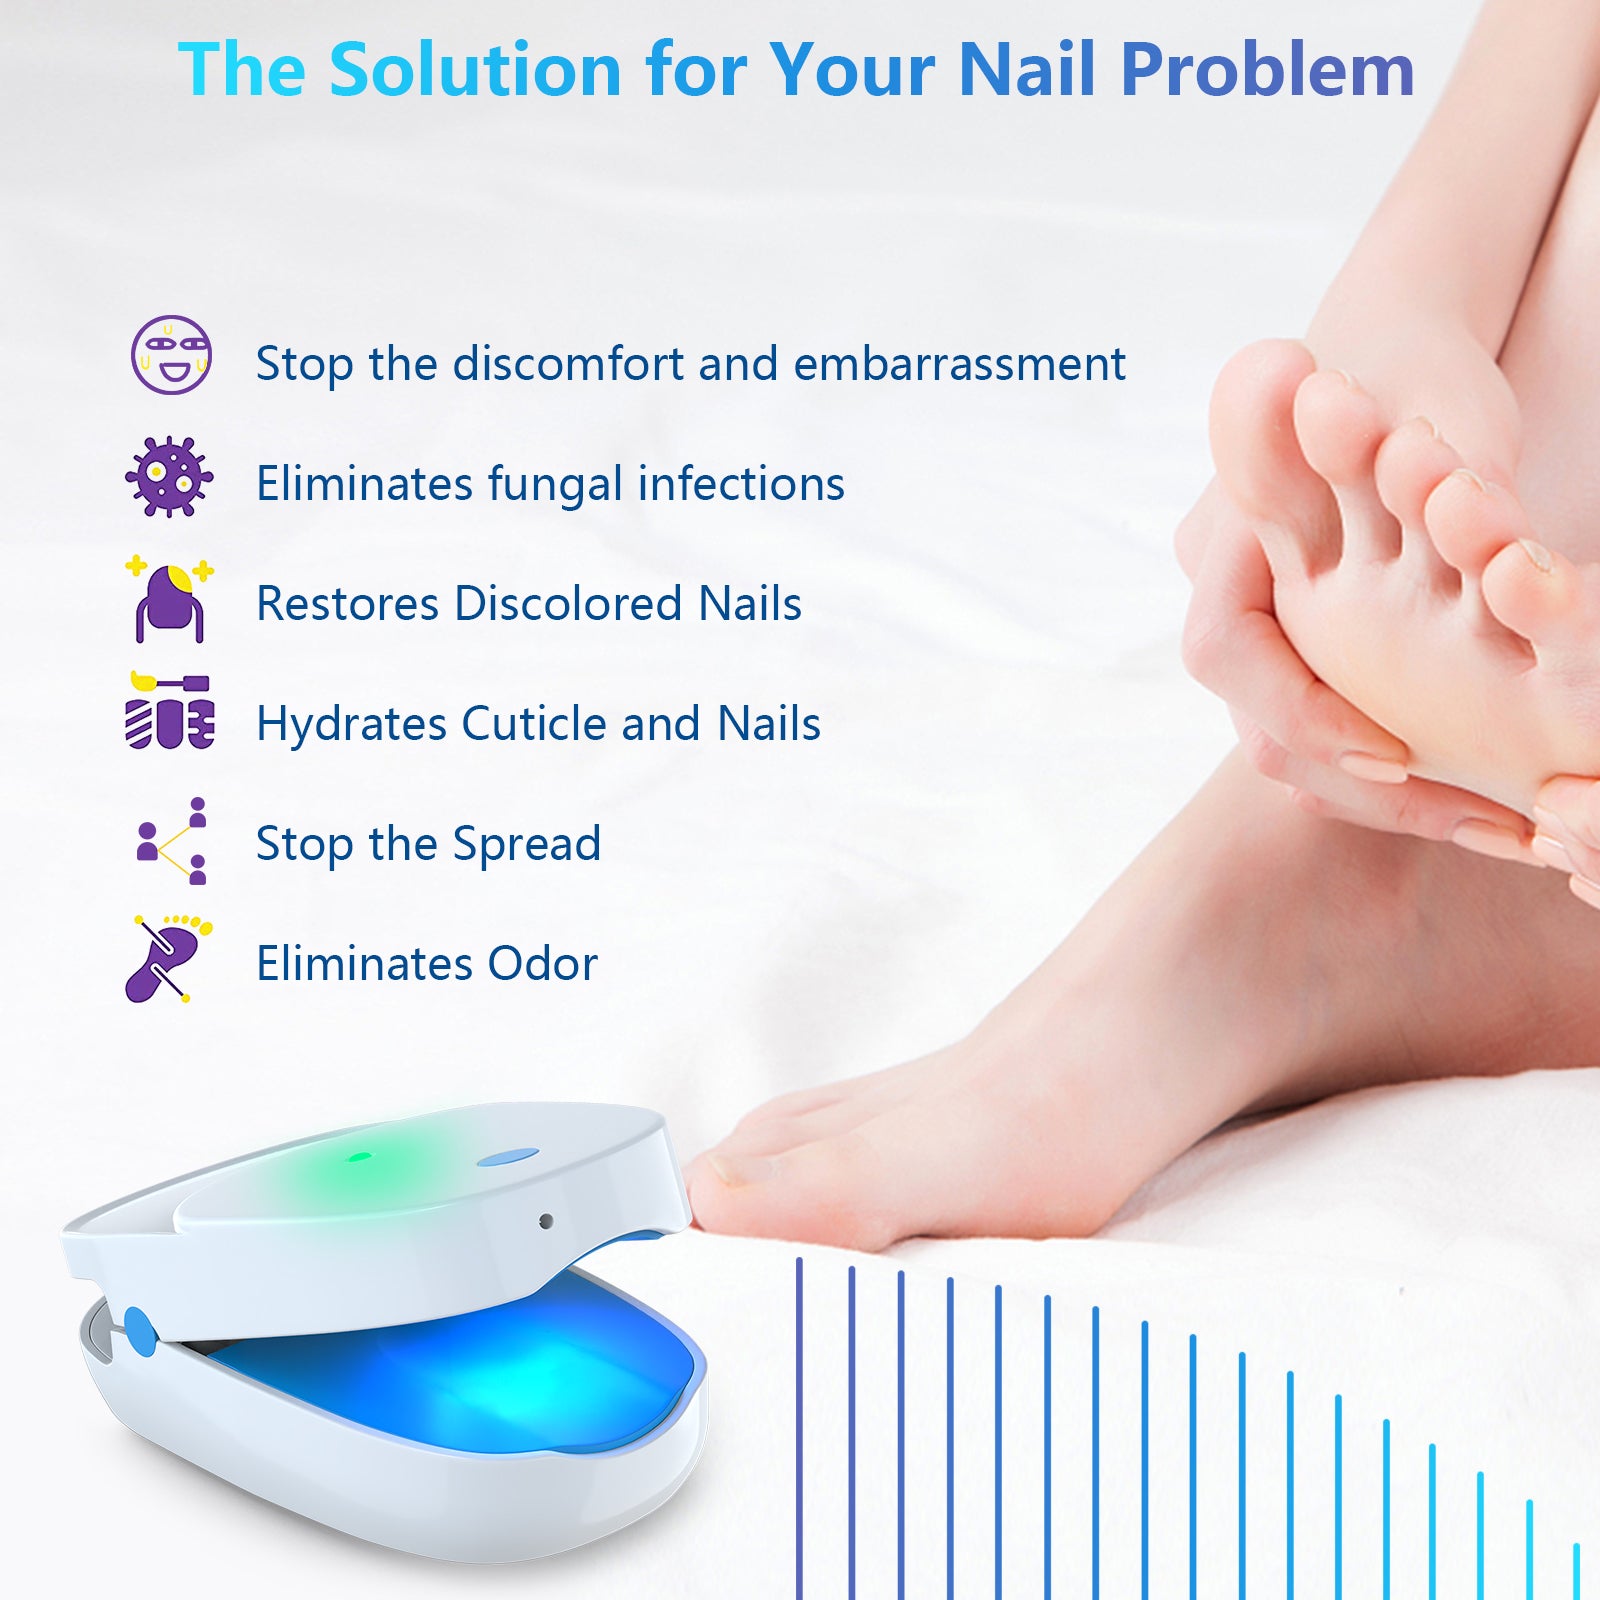 How to prevent and treat nail fungus - YouTube